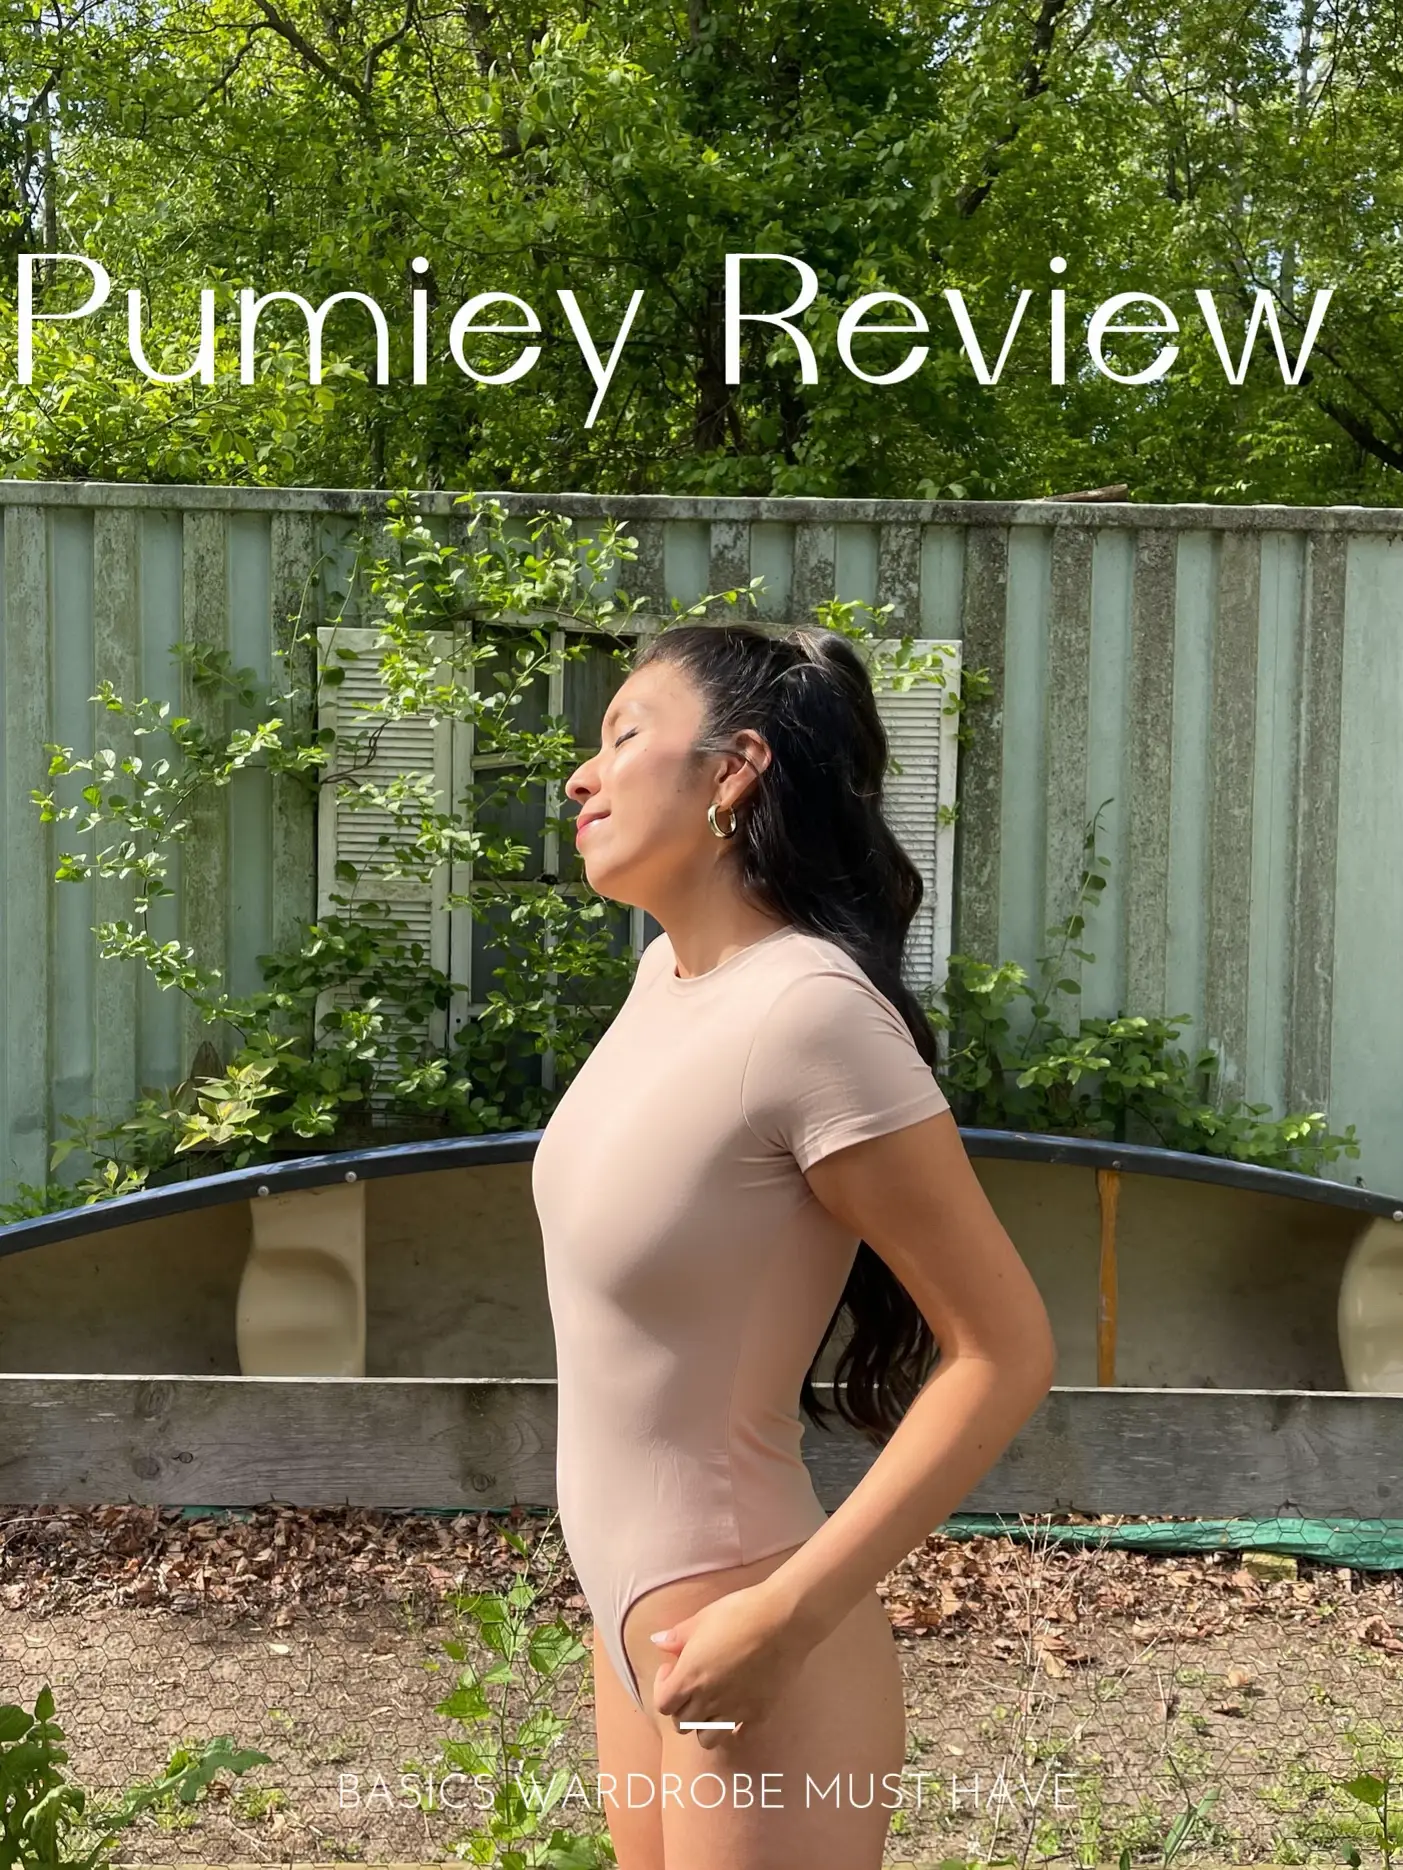 Pumiey review, Gallery posted by Rocio Roman